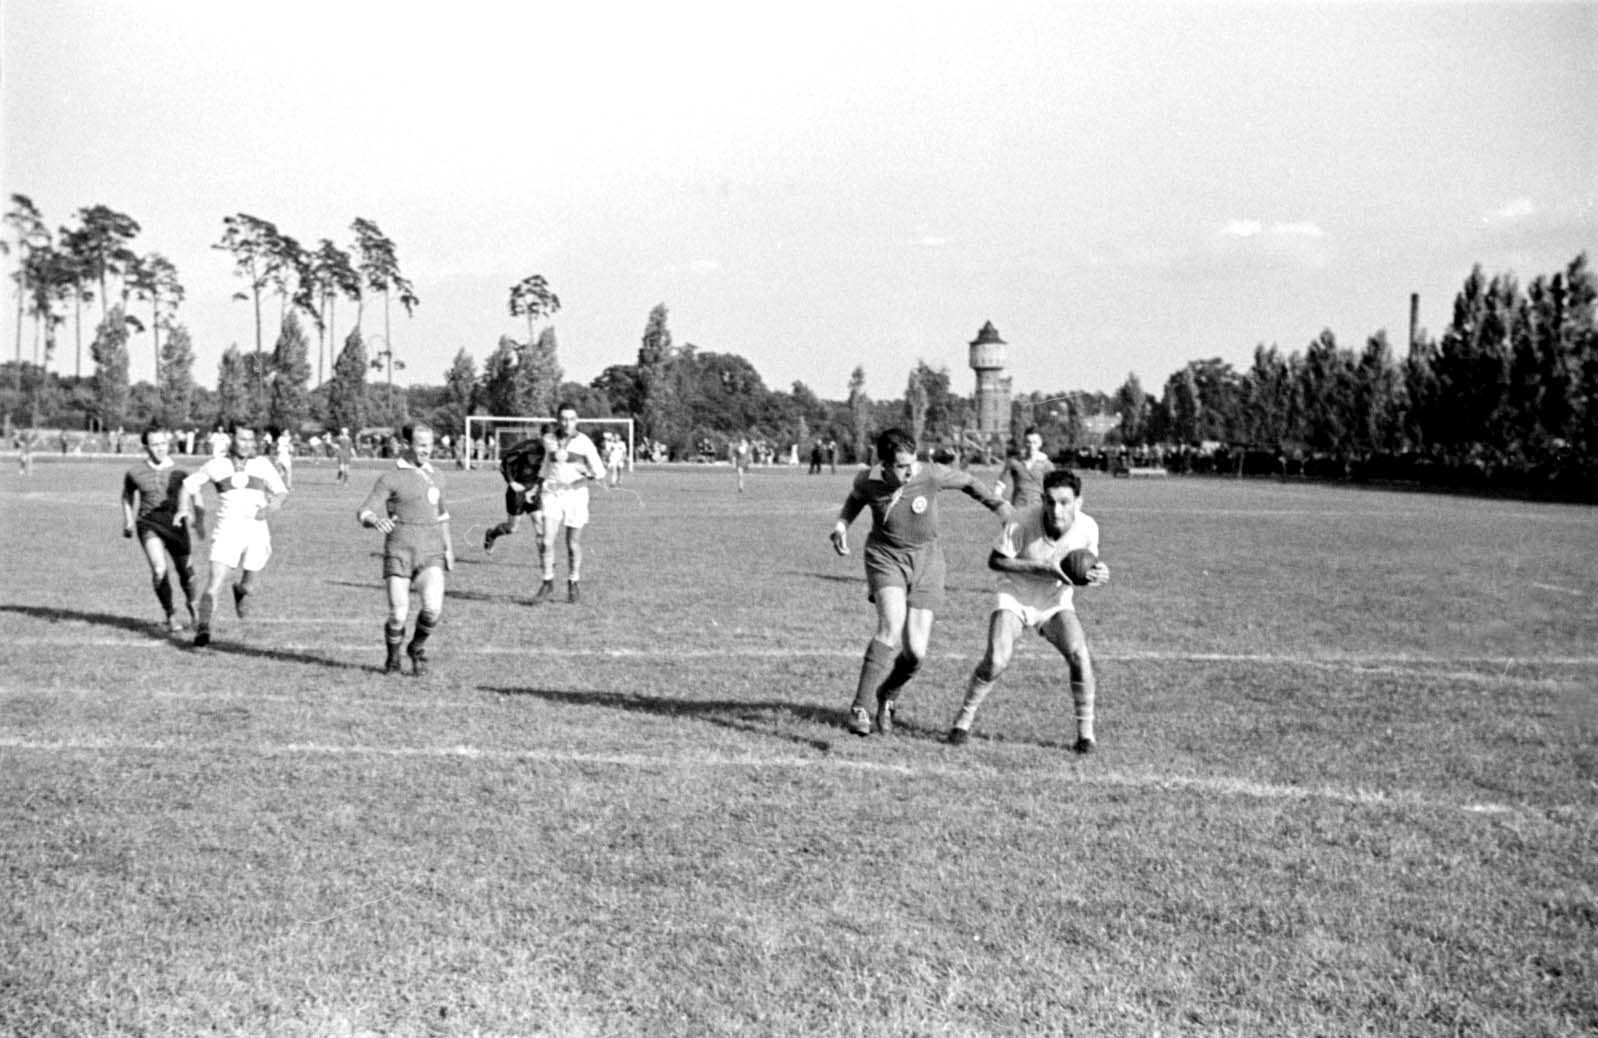 Berlin, Germany, 1937, a handball match at the "Bar-Kochba" international sports games with the participation of "Hakoach Vienna". The games took place at the Grunewald field and included soccer, handball and hockey